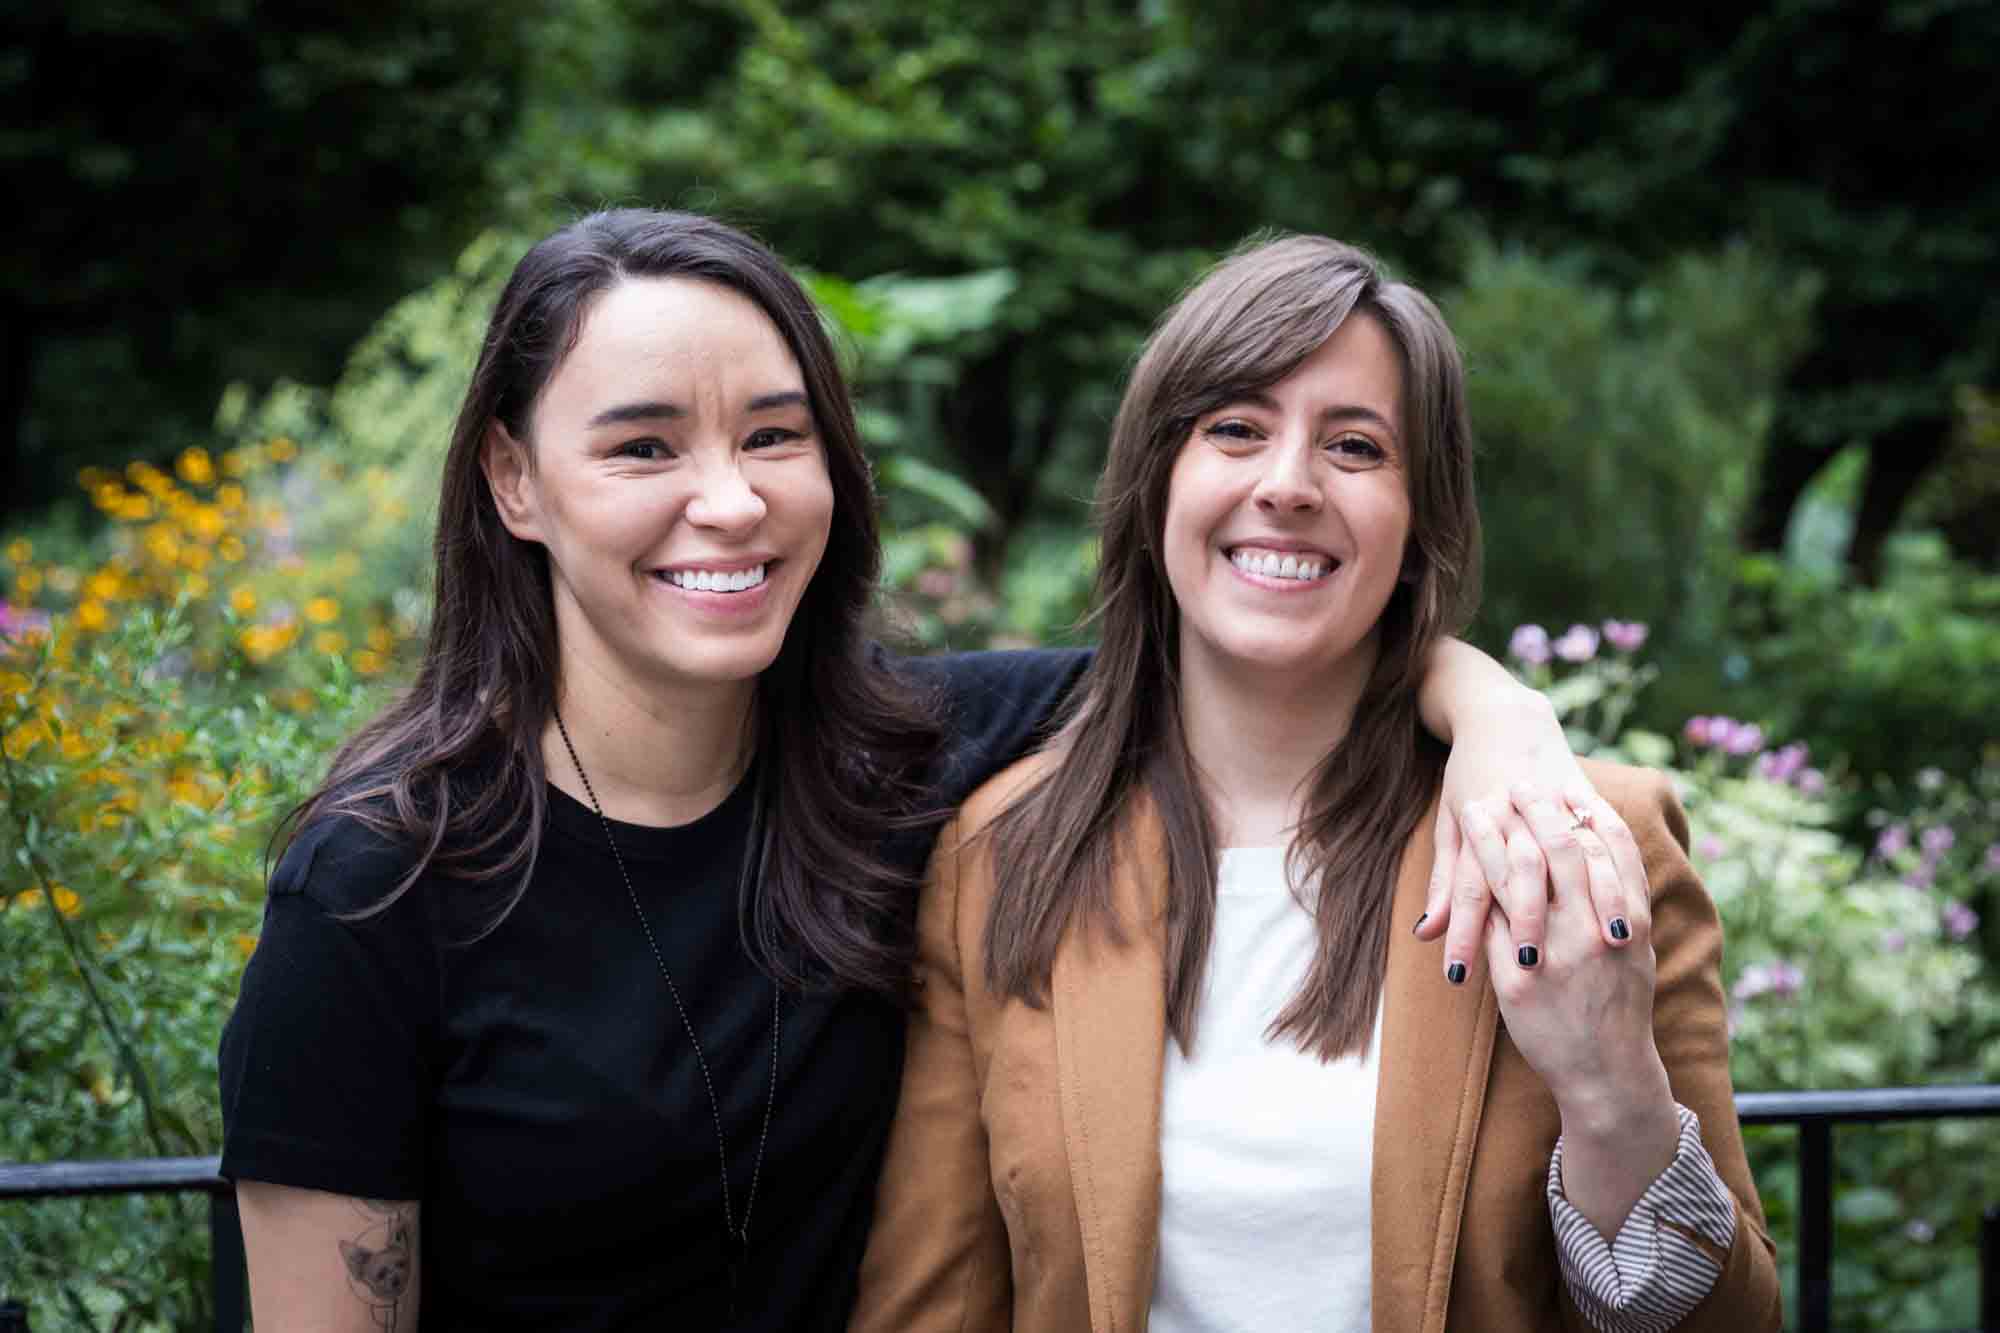 Two women standing in Riverside Park surrounded by green foliage and flowers for an article on how to produce a movie-themed surprise proposal